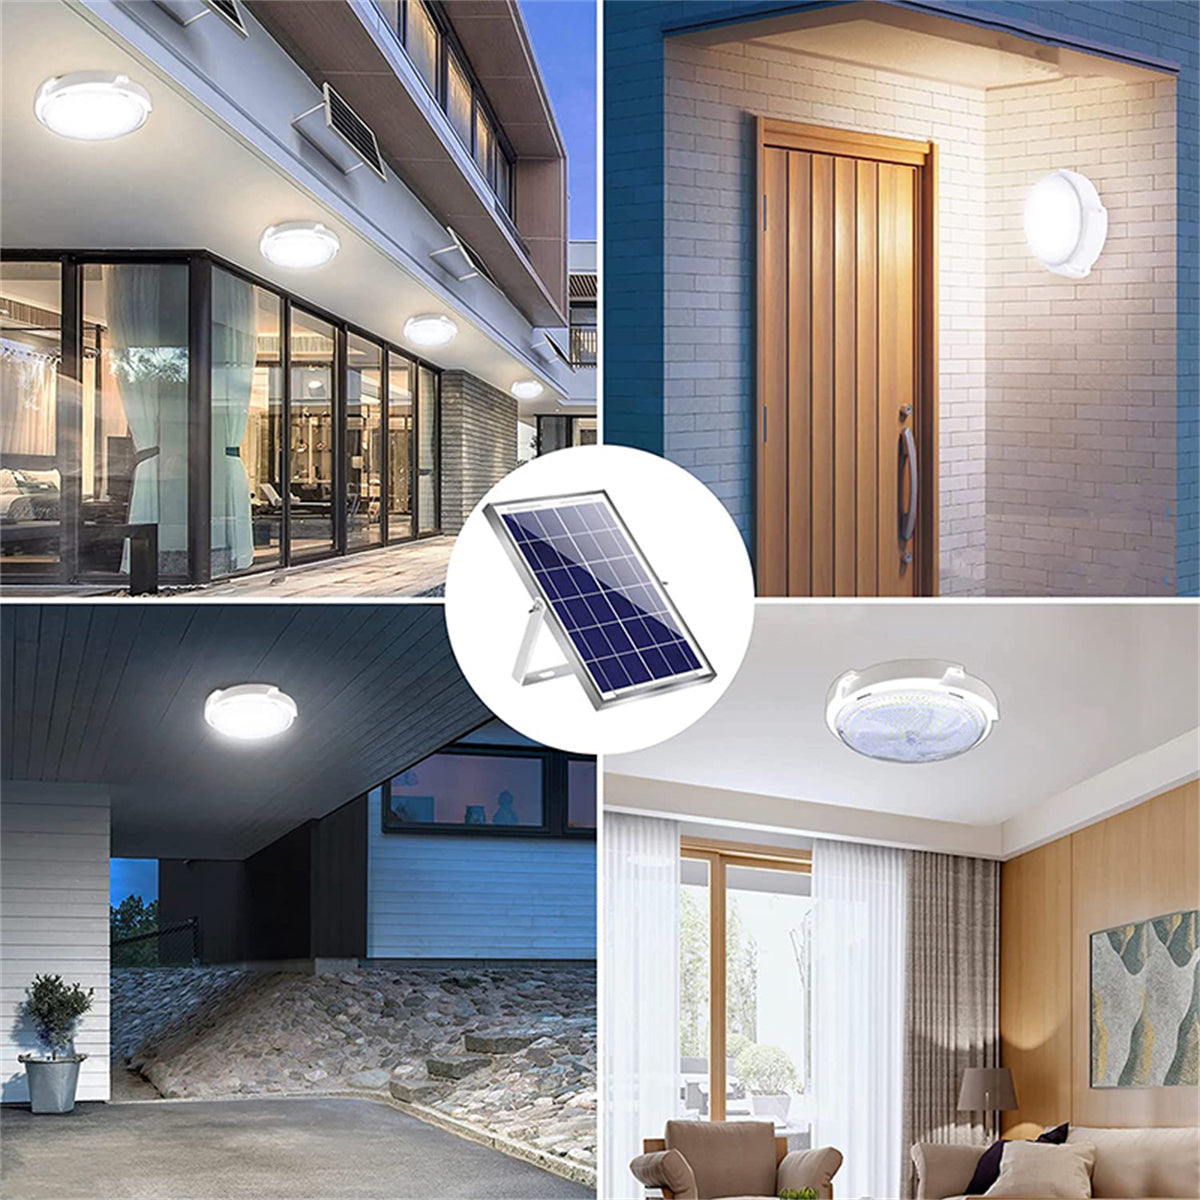 Solar Ceiling Light, 5000LM Solar Lights Indoor Outdoor, Brighter Solar Shed Lights with Remote Control, Cool White/Warm White Switchable Solar Pendant Light for Barn, Porch, Patio, Gazebo